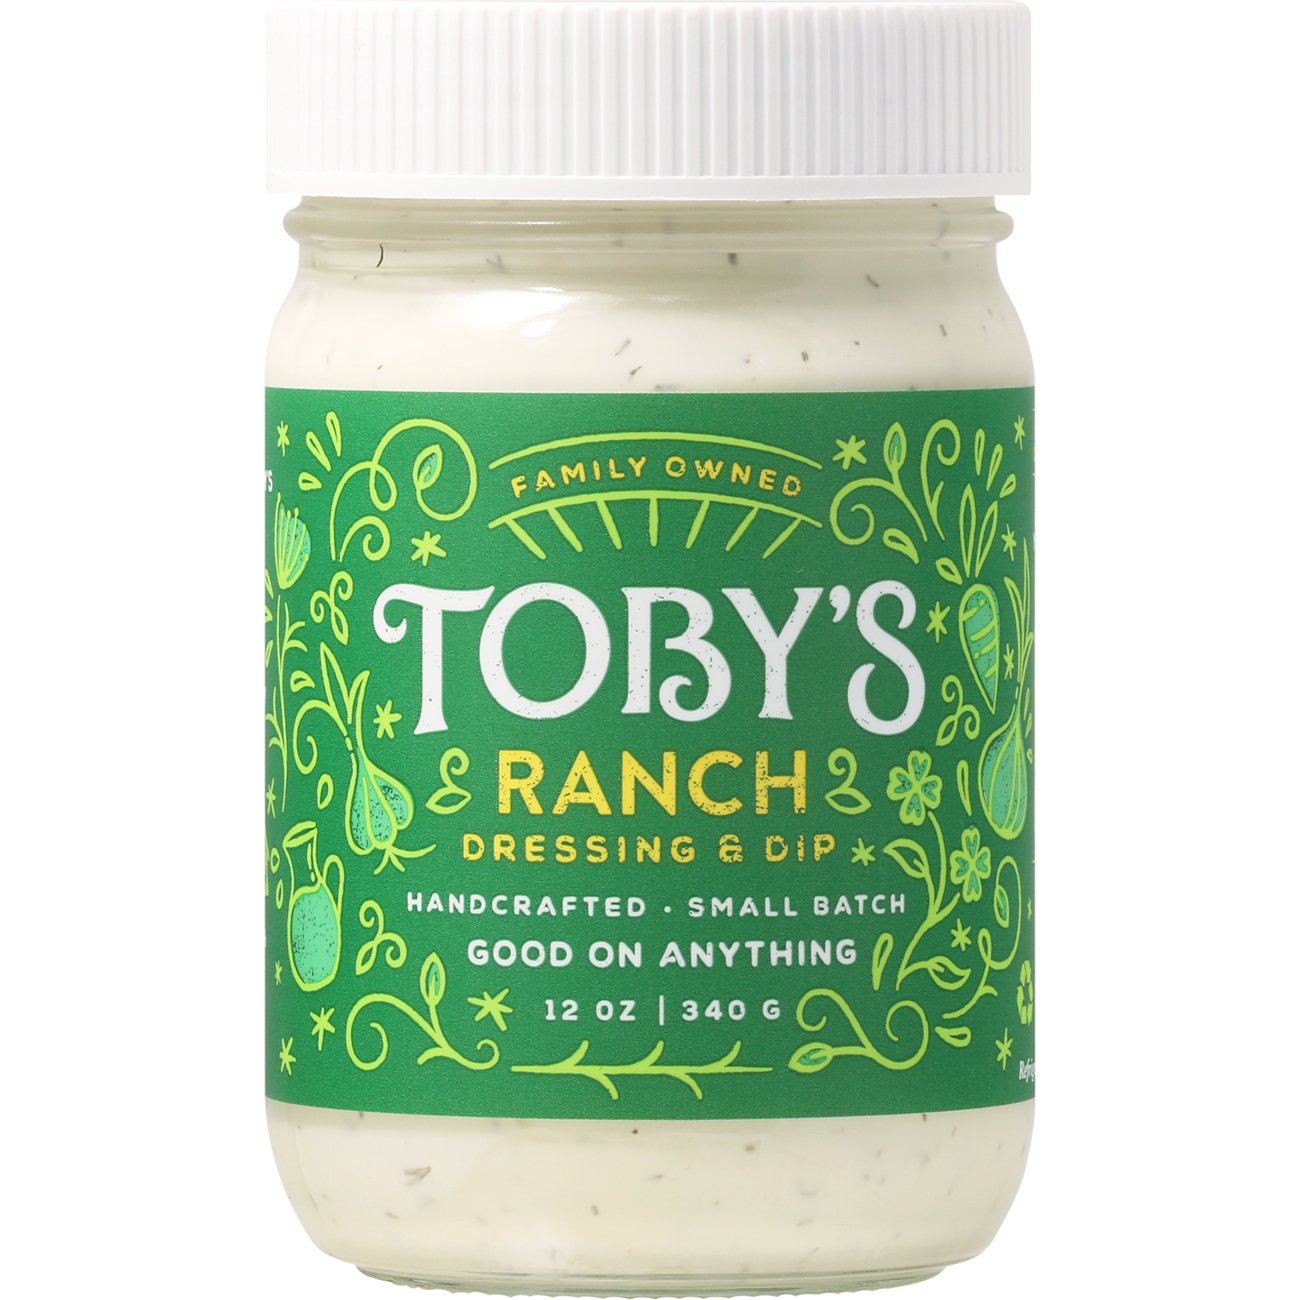 Buy One Plant Based Dip and Spread Get One FREE - Toby's Family Foods